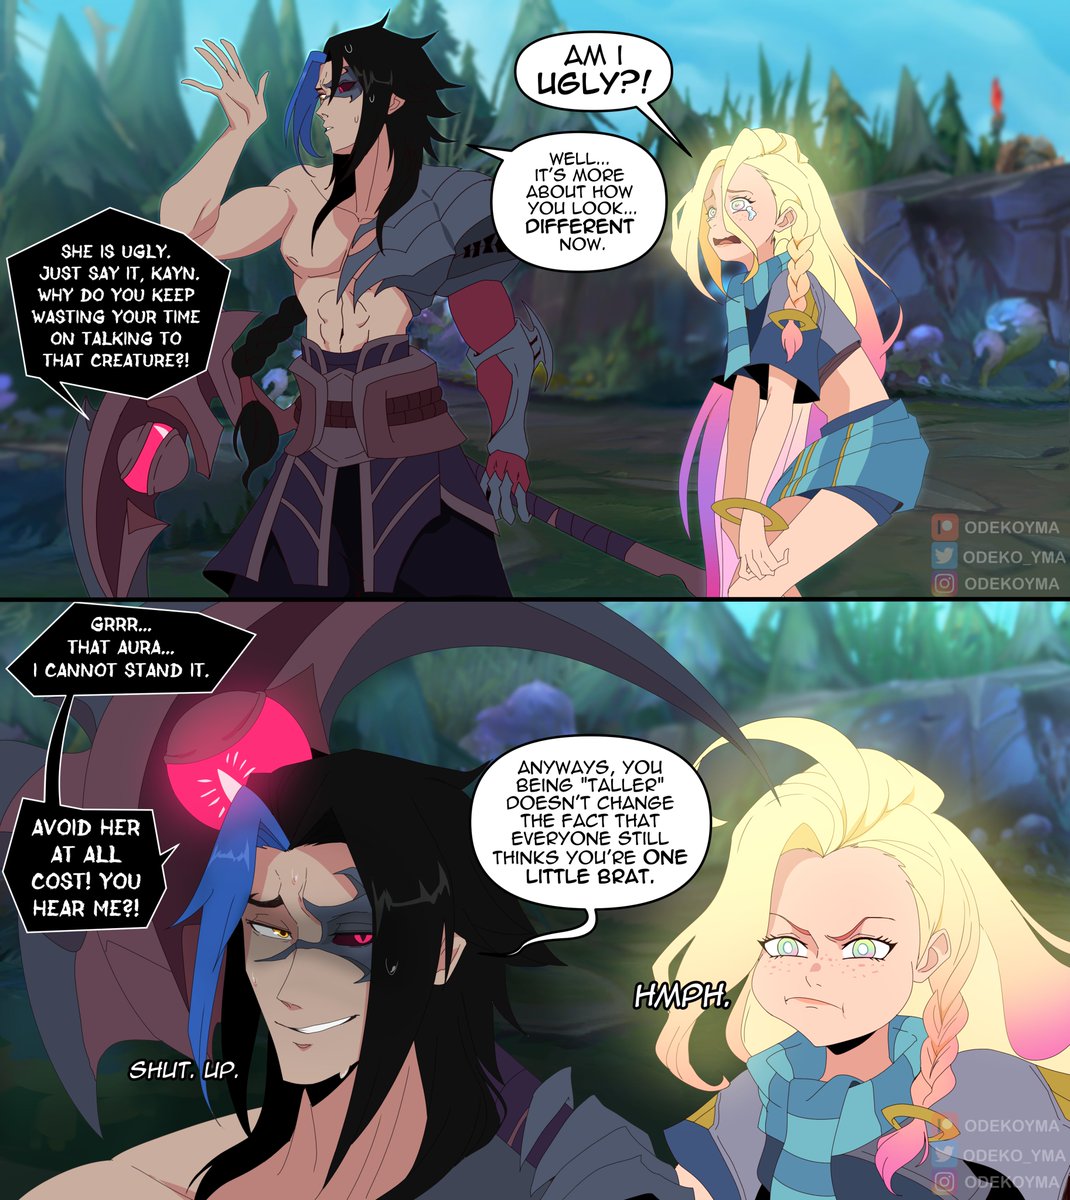 You guys asked for that way too much So I give you more  How Kayn & Rhaast reacted to Zoe   #Zoe #Kayn #LeagueOfLegends #LeagueOfLegendsFanArt #ArtofLegends